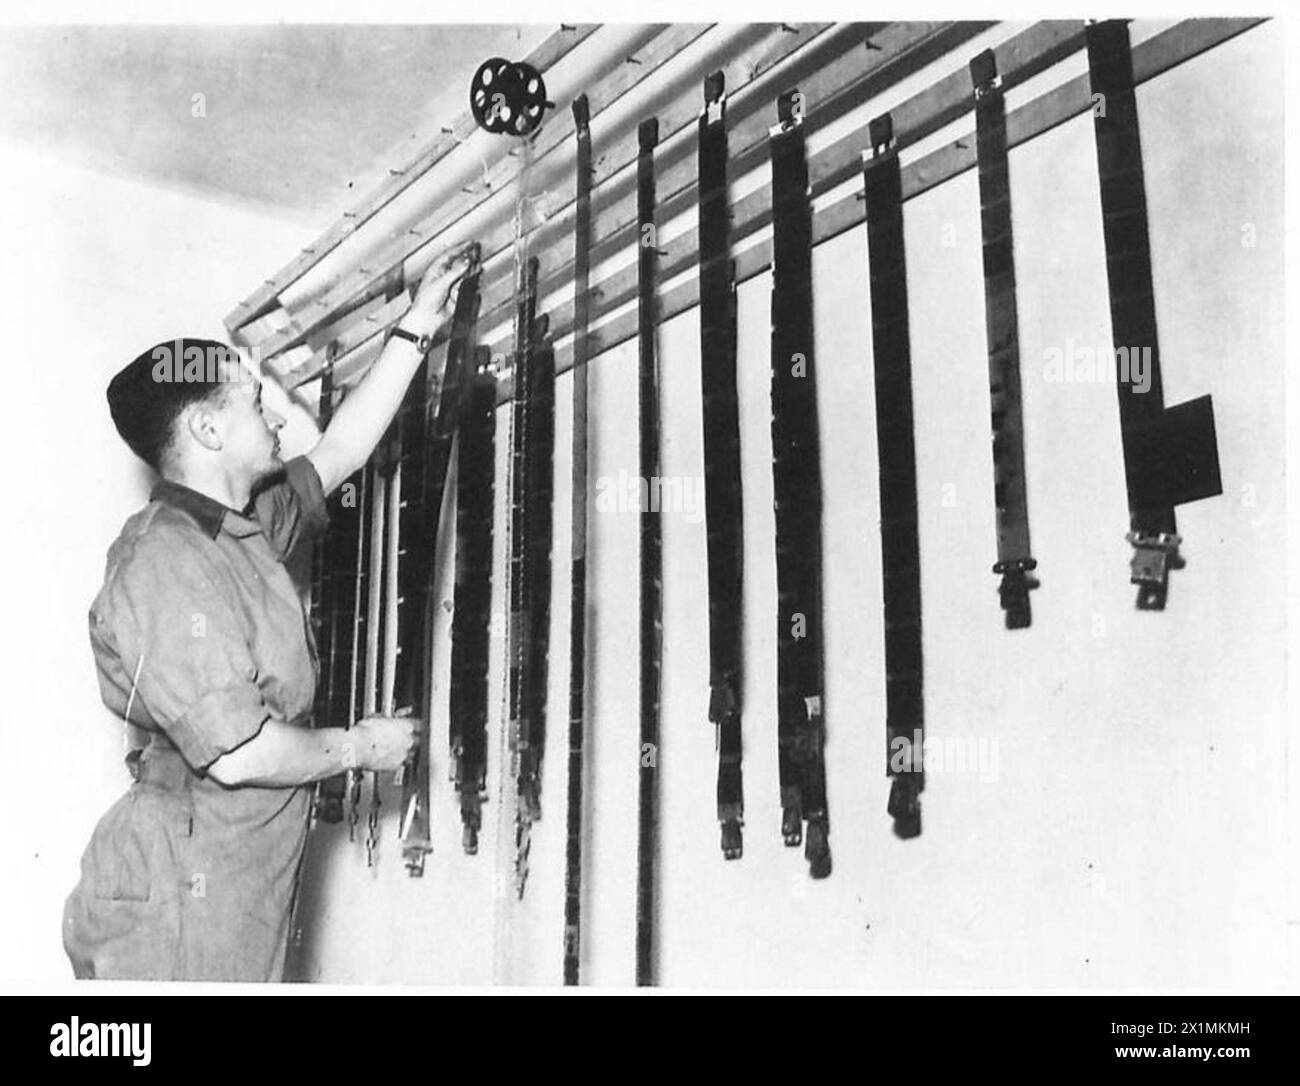 THE ARMY FILM AND PHOTOGRAPHIC UNIT - The drying racks in the developing room , British Army Stock Photo